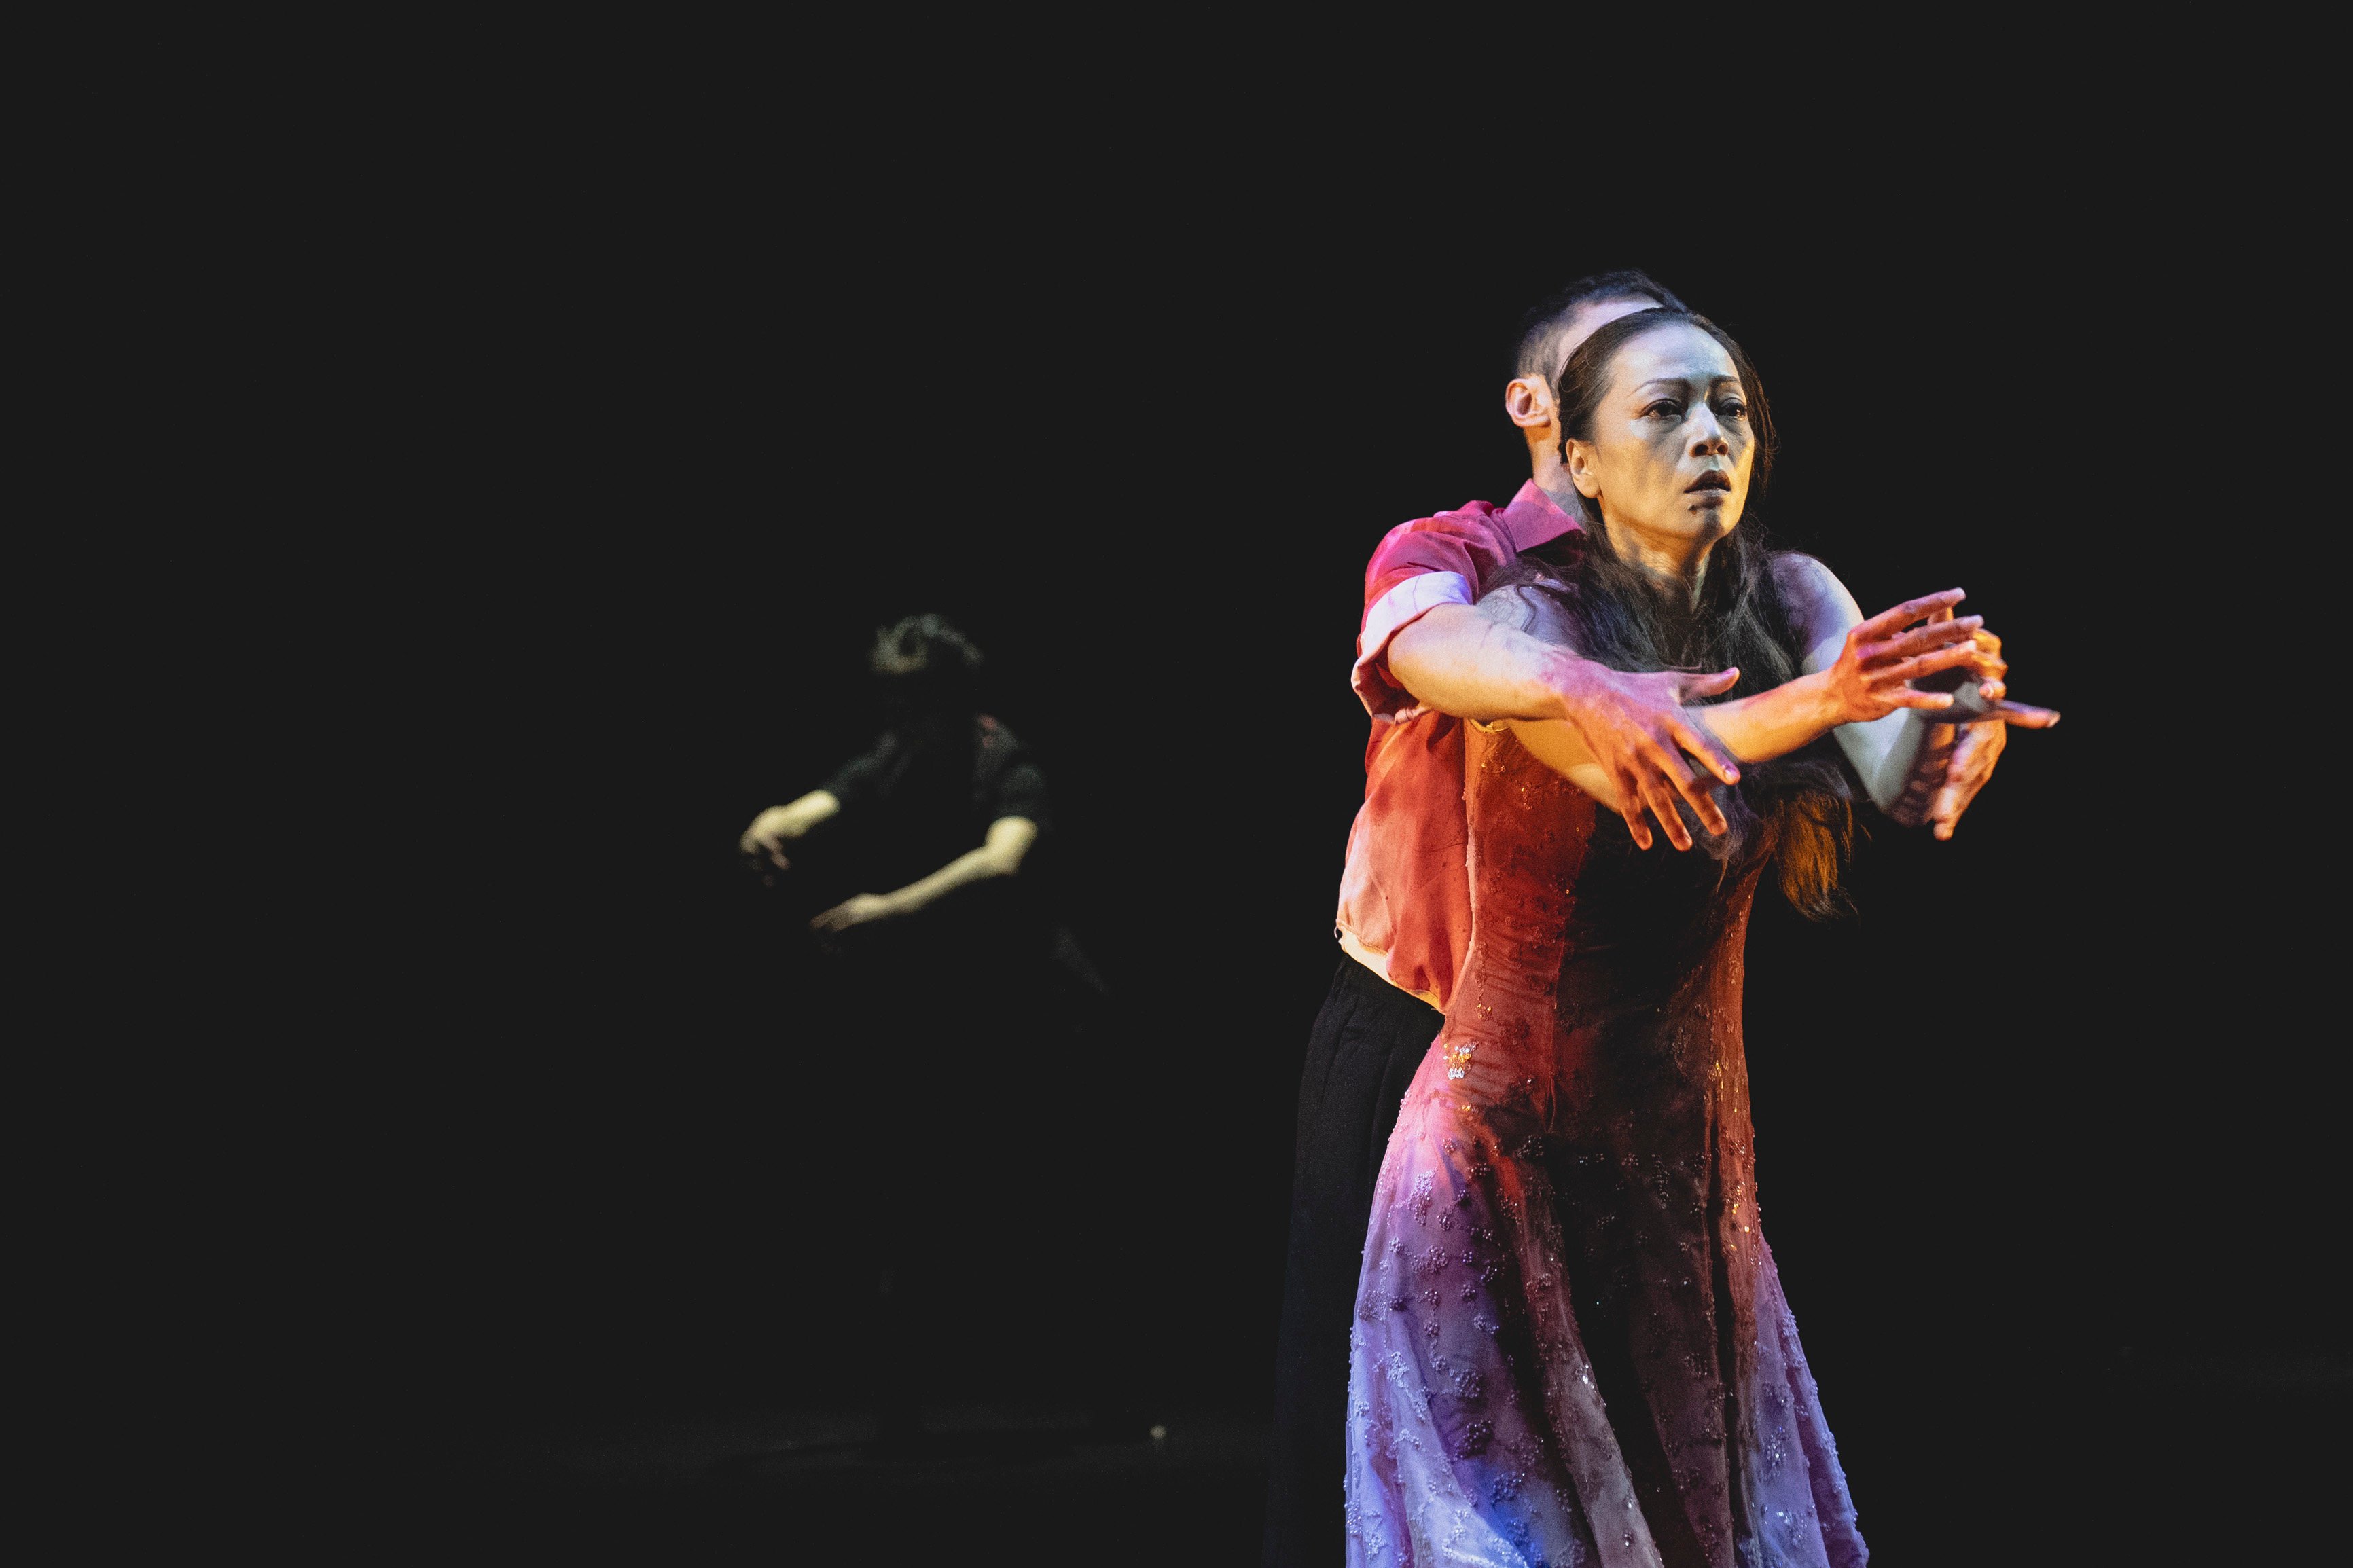 Hong Kong Dance Company principal dancer Hua Chi-yu (front) in the title role and senior dancer Lee Chia-ming (rear) as Macbeth in Lady Macbeth, a dance theatre work staged as part of the first Hong Kong International Shakespeare Festival. Photo: Fung Wai-sun